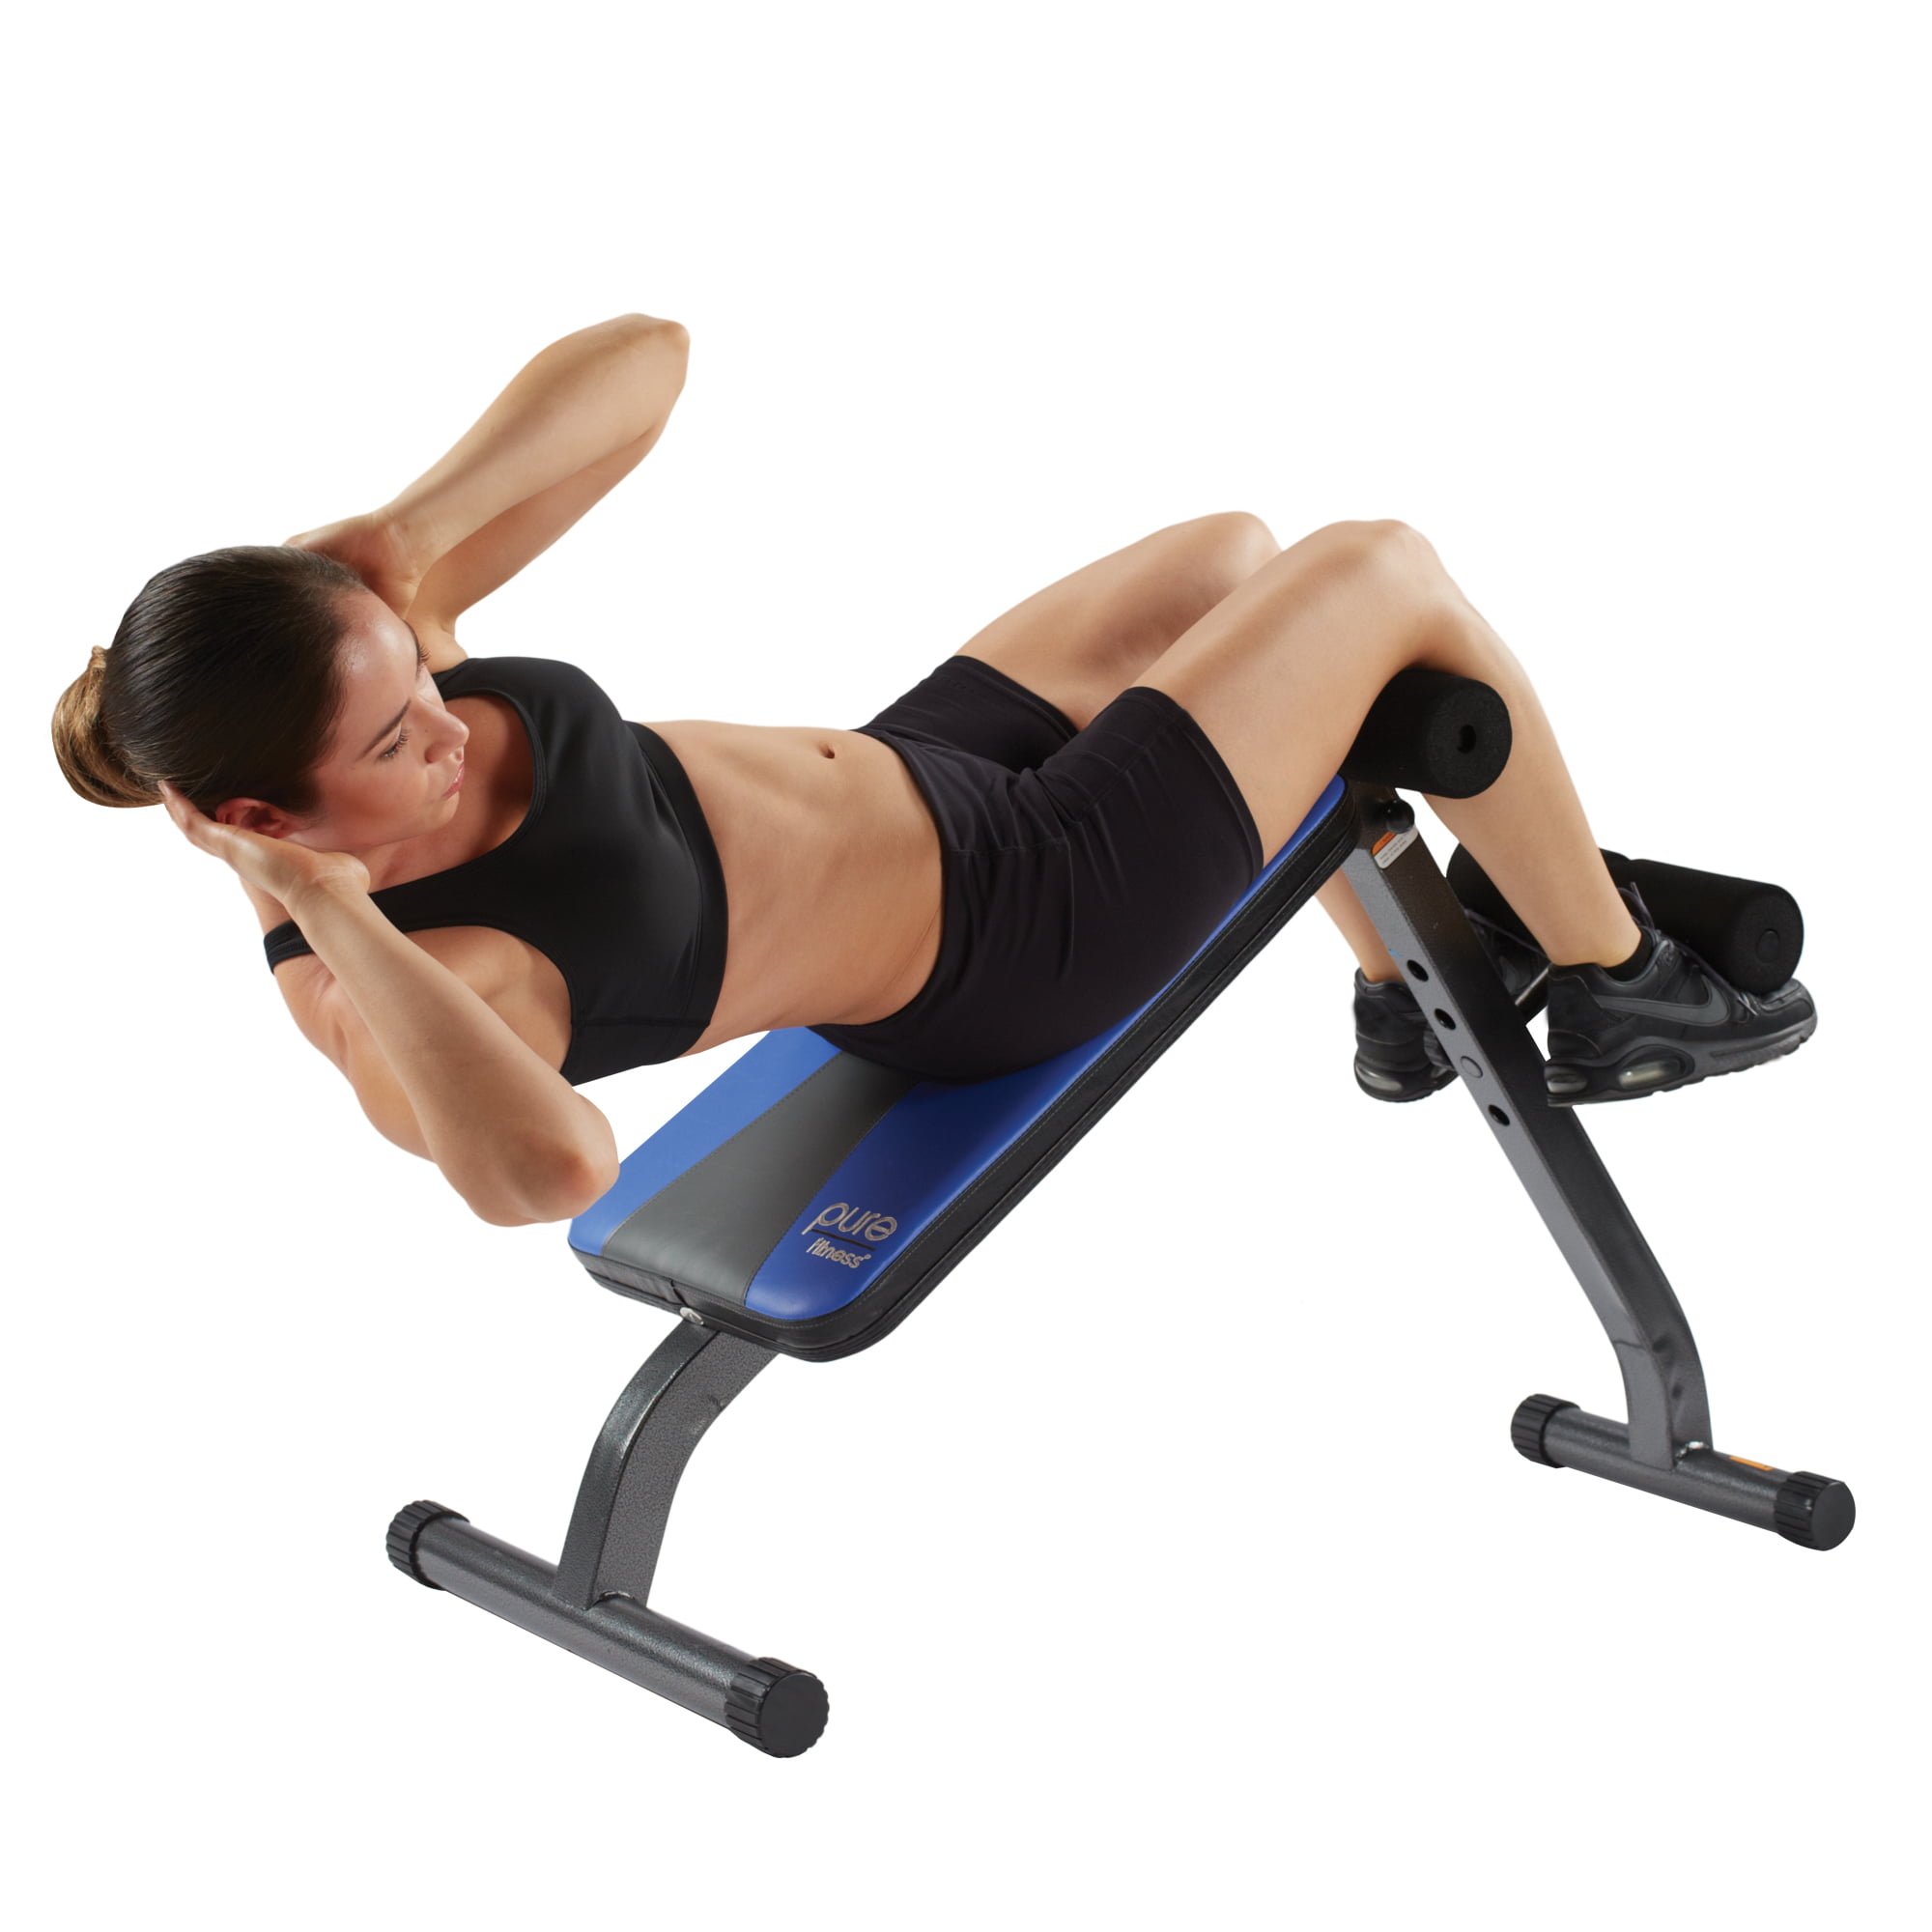 Generic QY-UK4-16FEB-20-892 *1**2792** Exercise Board Bench AB Abdominal Crunch Sit Up Sit Up Bench minal C Home Gym Foldable oldable Slant Fitness Home Gym Foldable